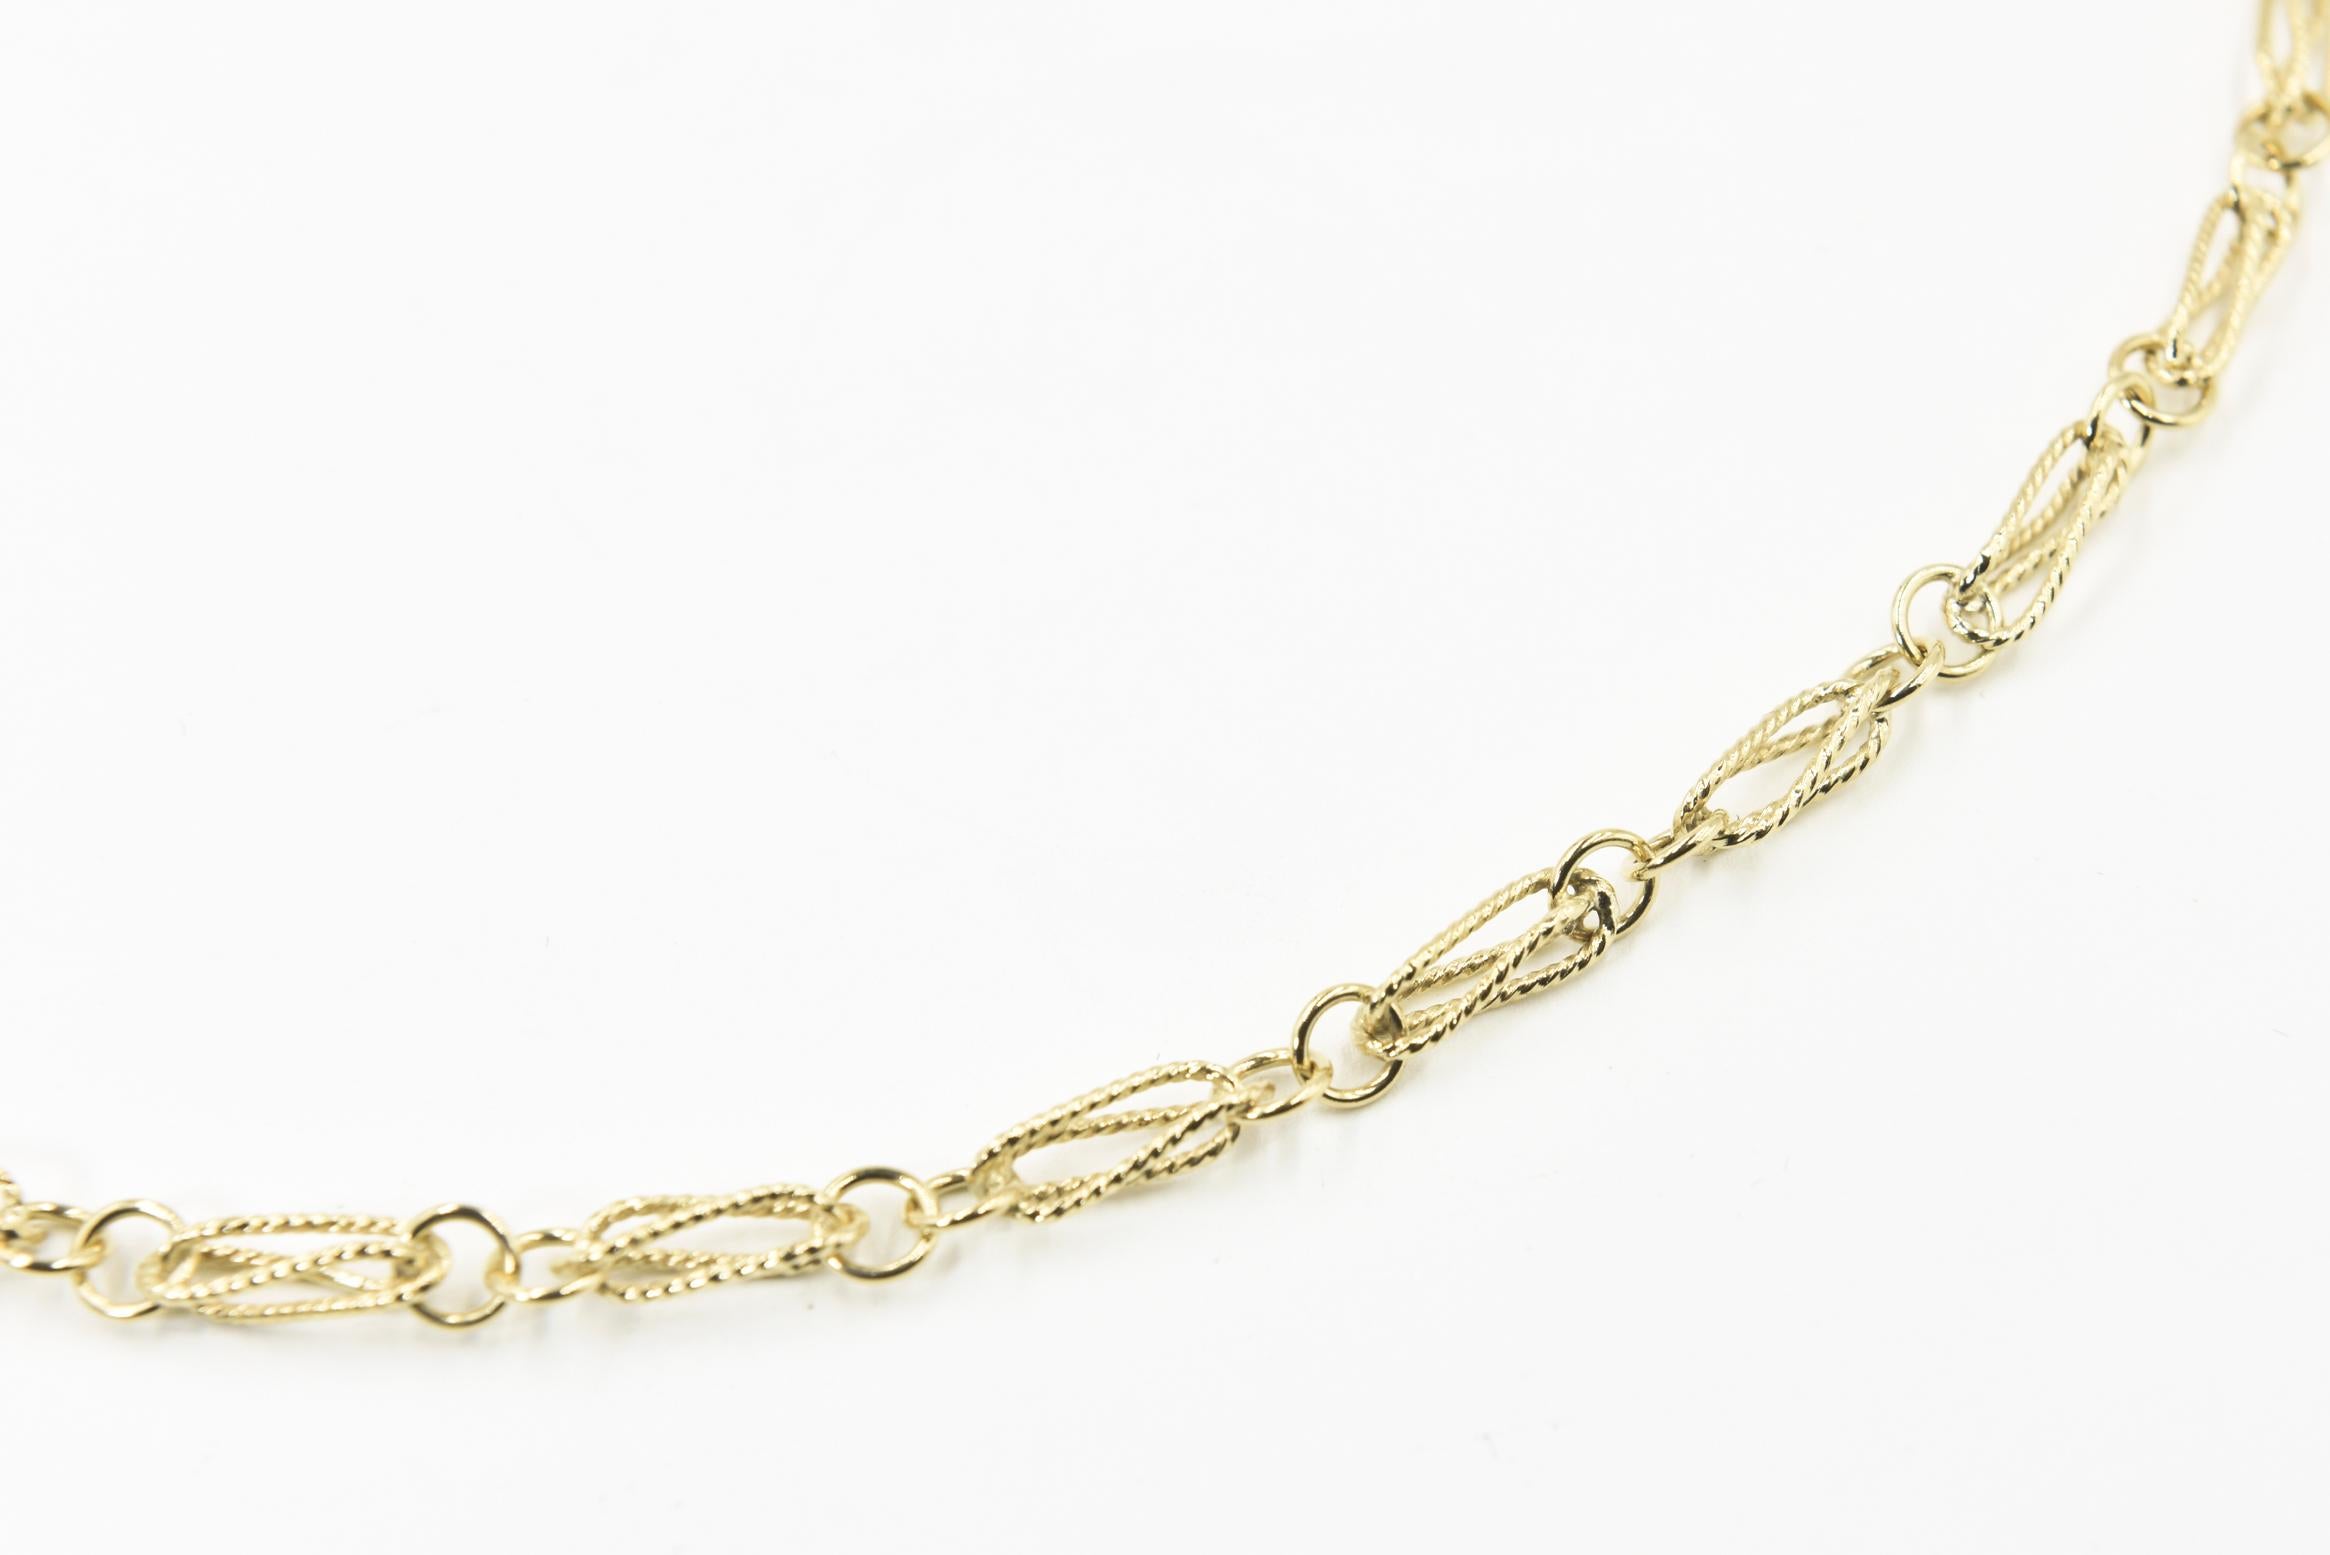 Highly stylized Italian 18k yellow gold necklace featuring an open oval twisted gold links rotating with smooth gold circles.  It closes with a jump ring.
Marked  750 and 61 VI 
